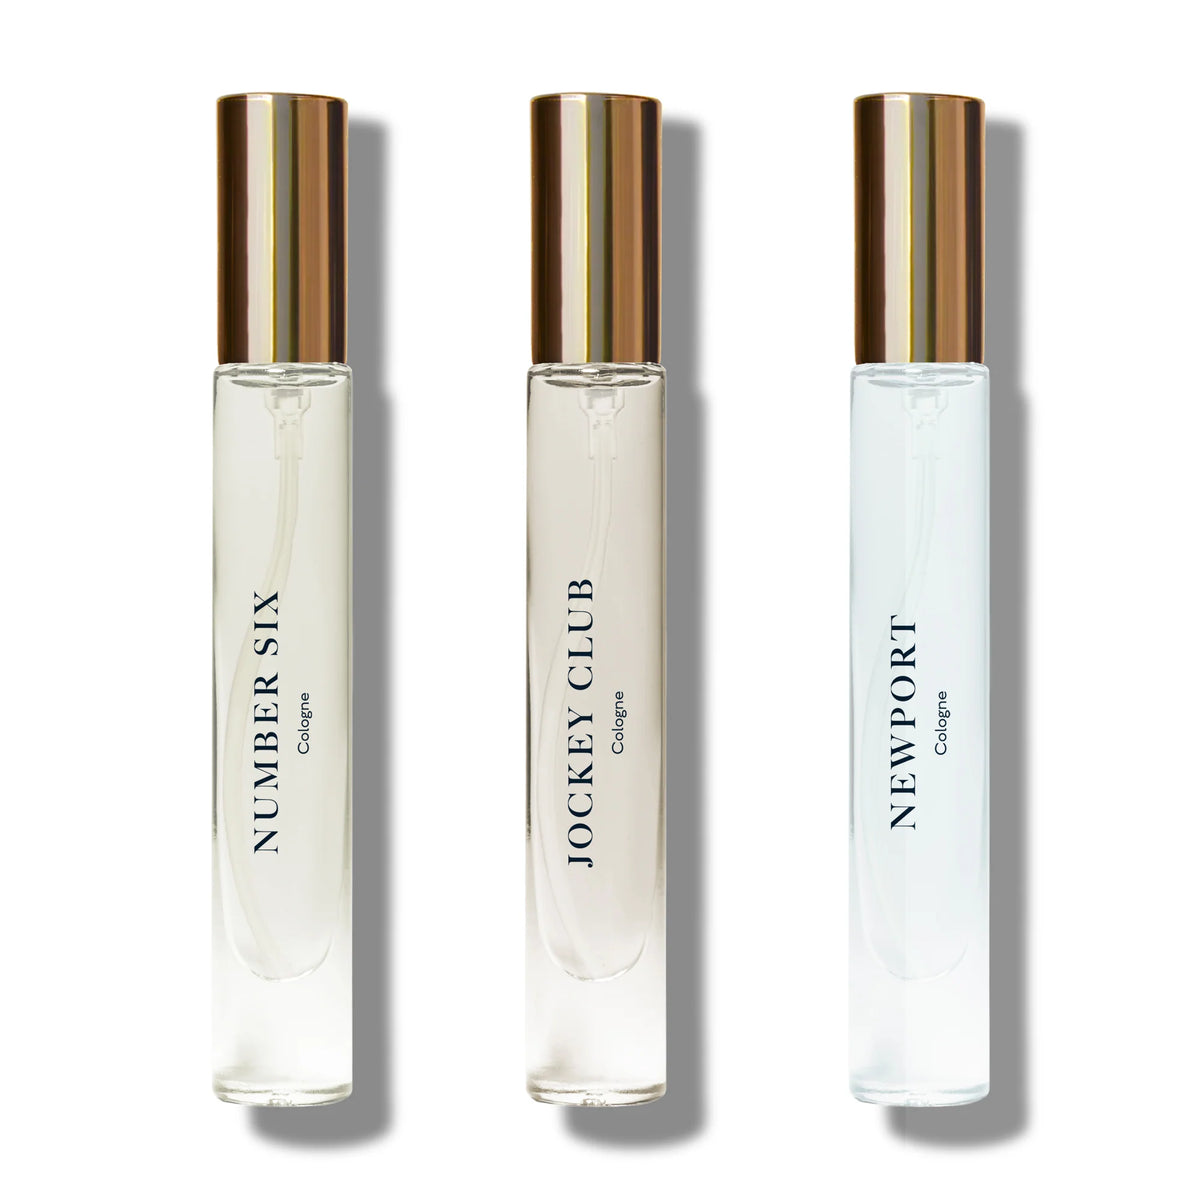 Three elegant Caswell Massey Cologne Discovery Set bottles in a line on a white background, labeled "number six," "jockey club," and "newport" respectively, each with a gold cap